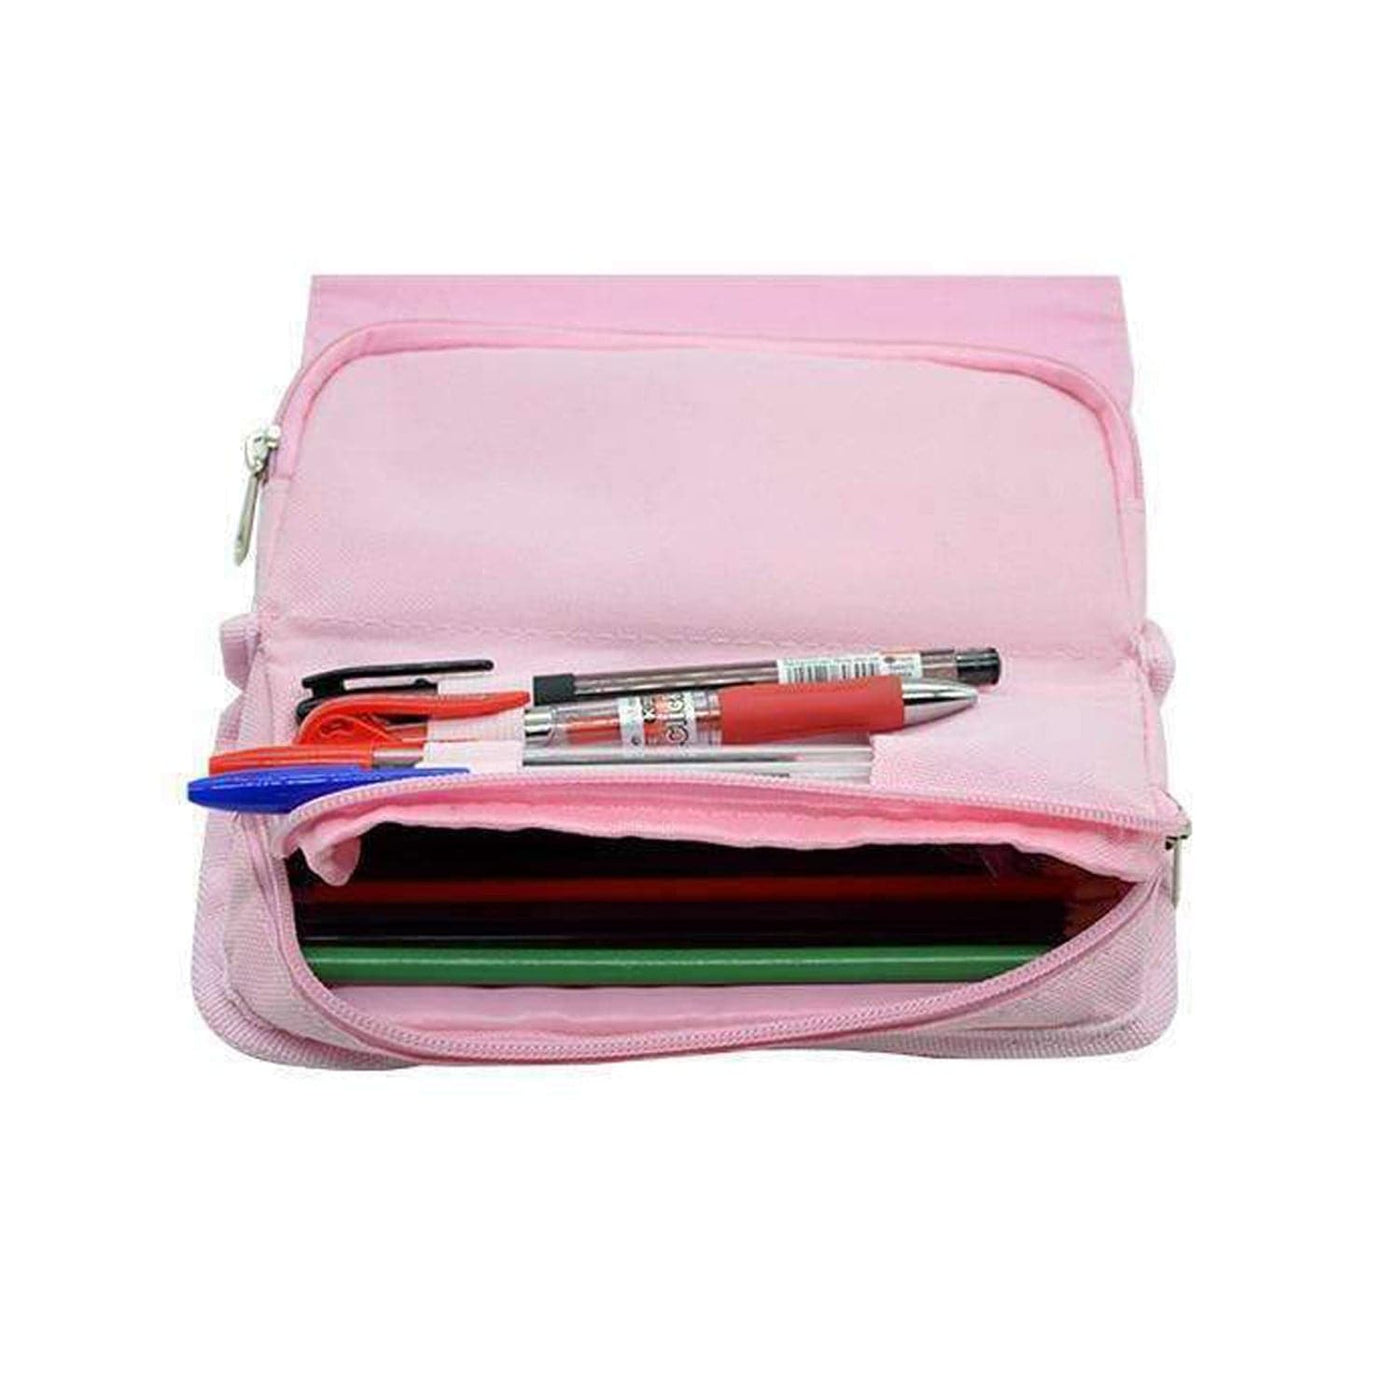 Good Luck Babe - Chappell Roan Pencil Case